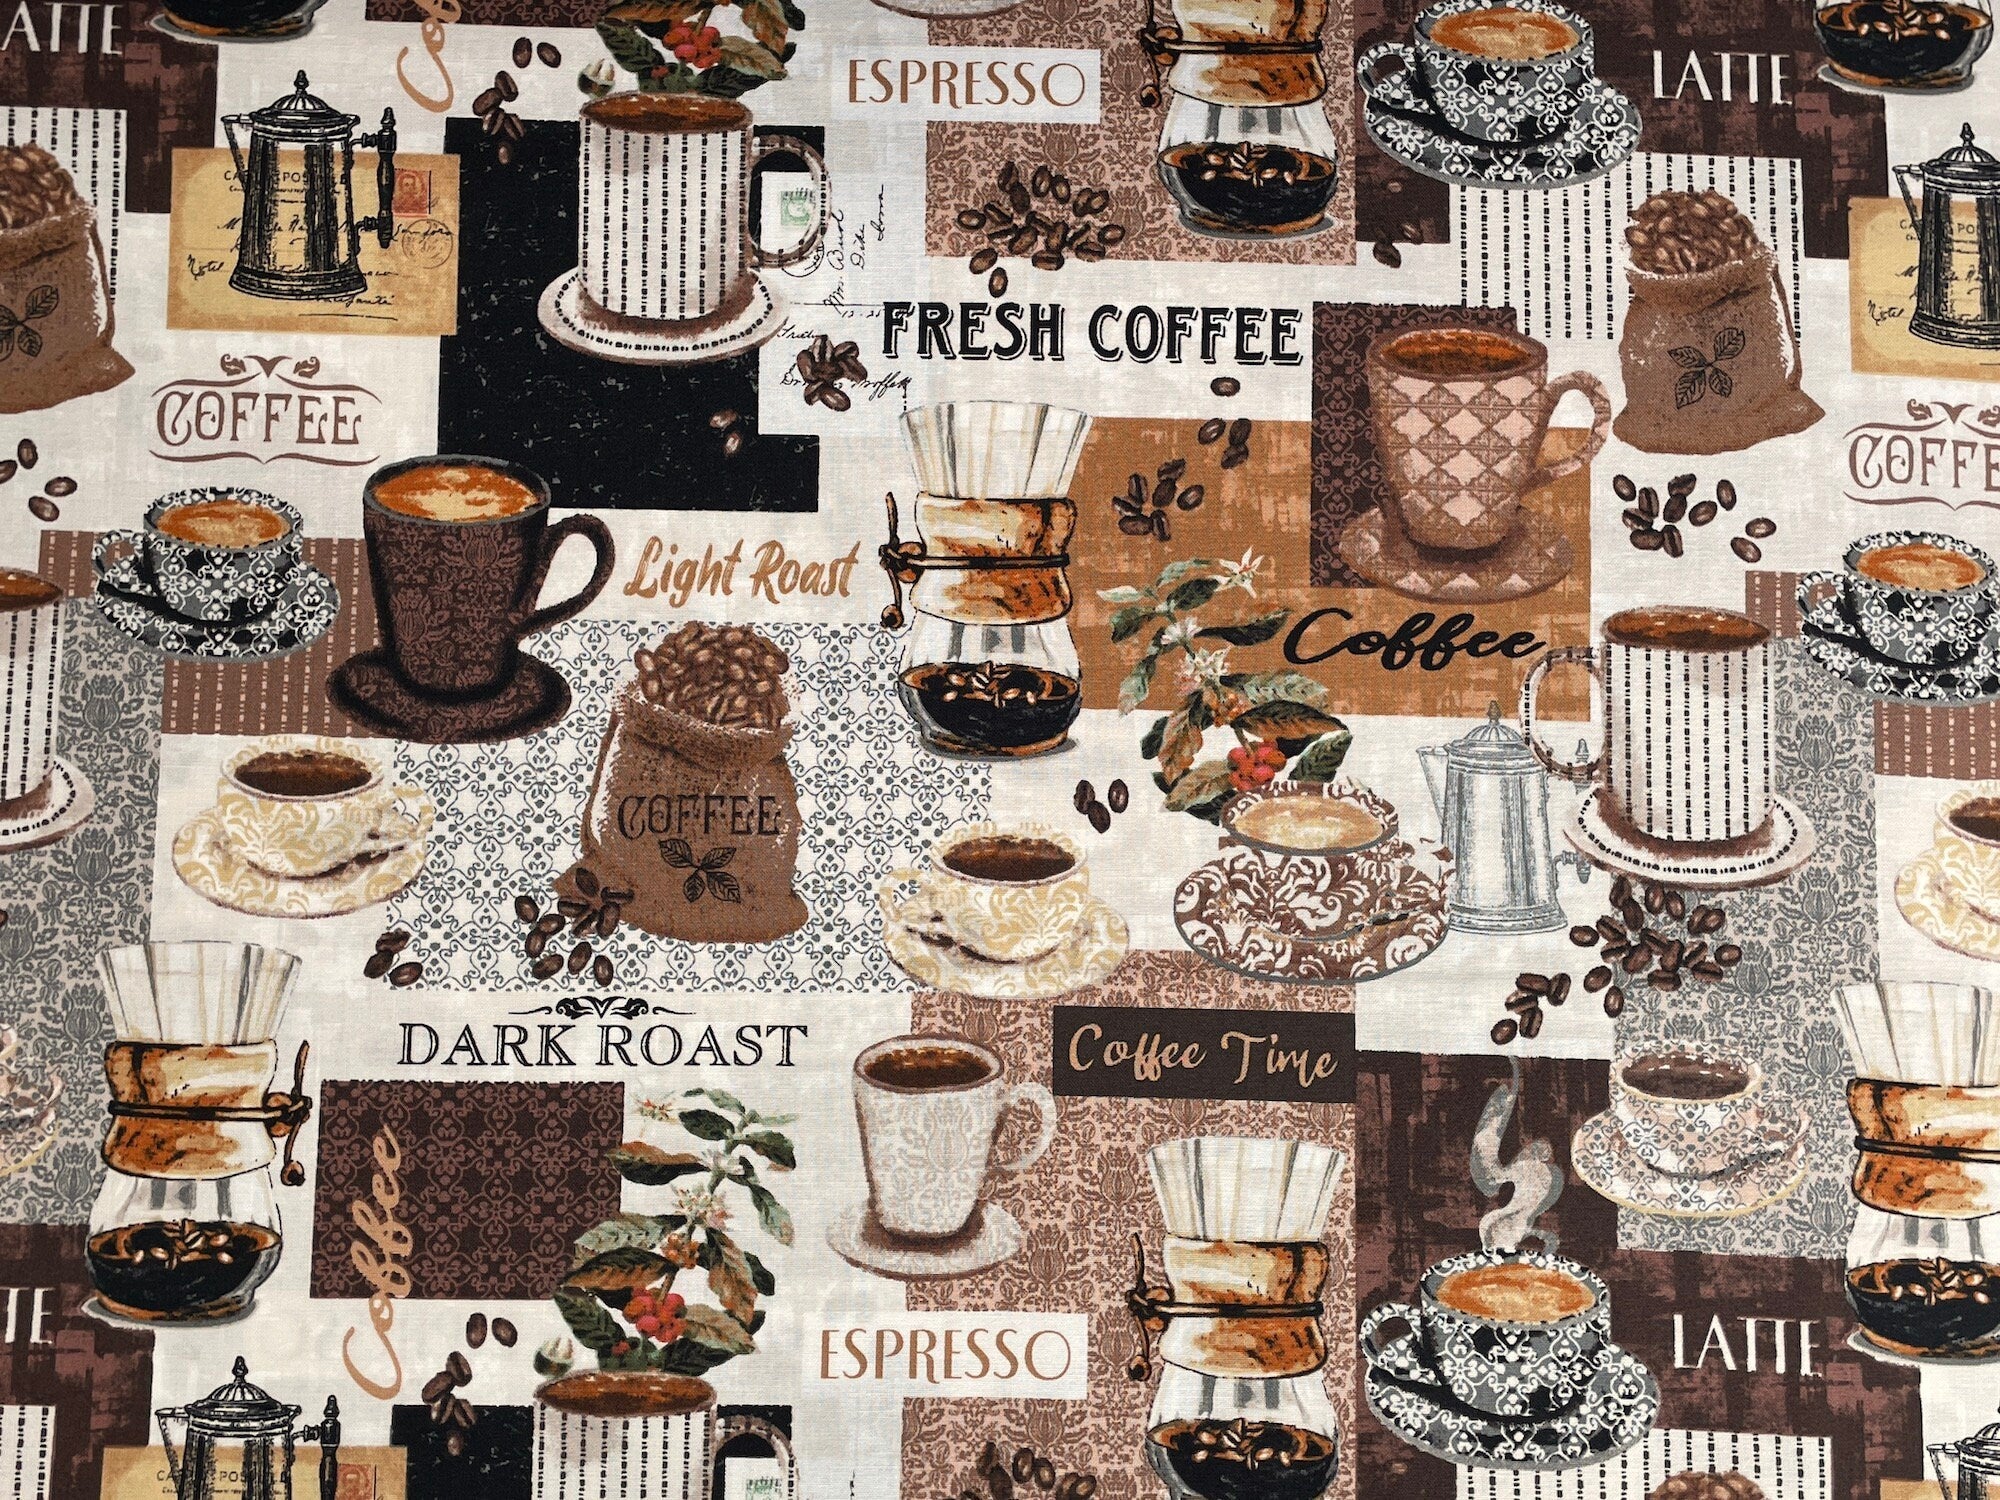 This fabric is part of the Coffee Connoisseur collection by Jean Plout and is called Cream Main Street Café Patch. This fabric is covered with coffee cups and mugs filled with coffee sitting on saucers, coffee beans, various coffee makers and more. You will also find coffee sayings such as coffee time, dark roast, light roast, fresh coffee and more